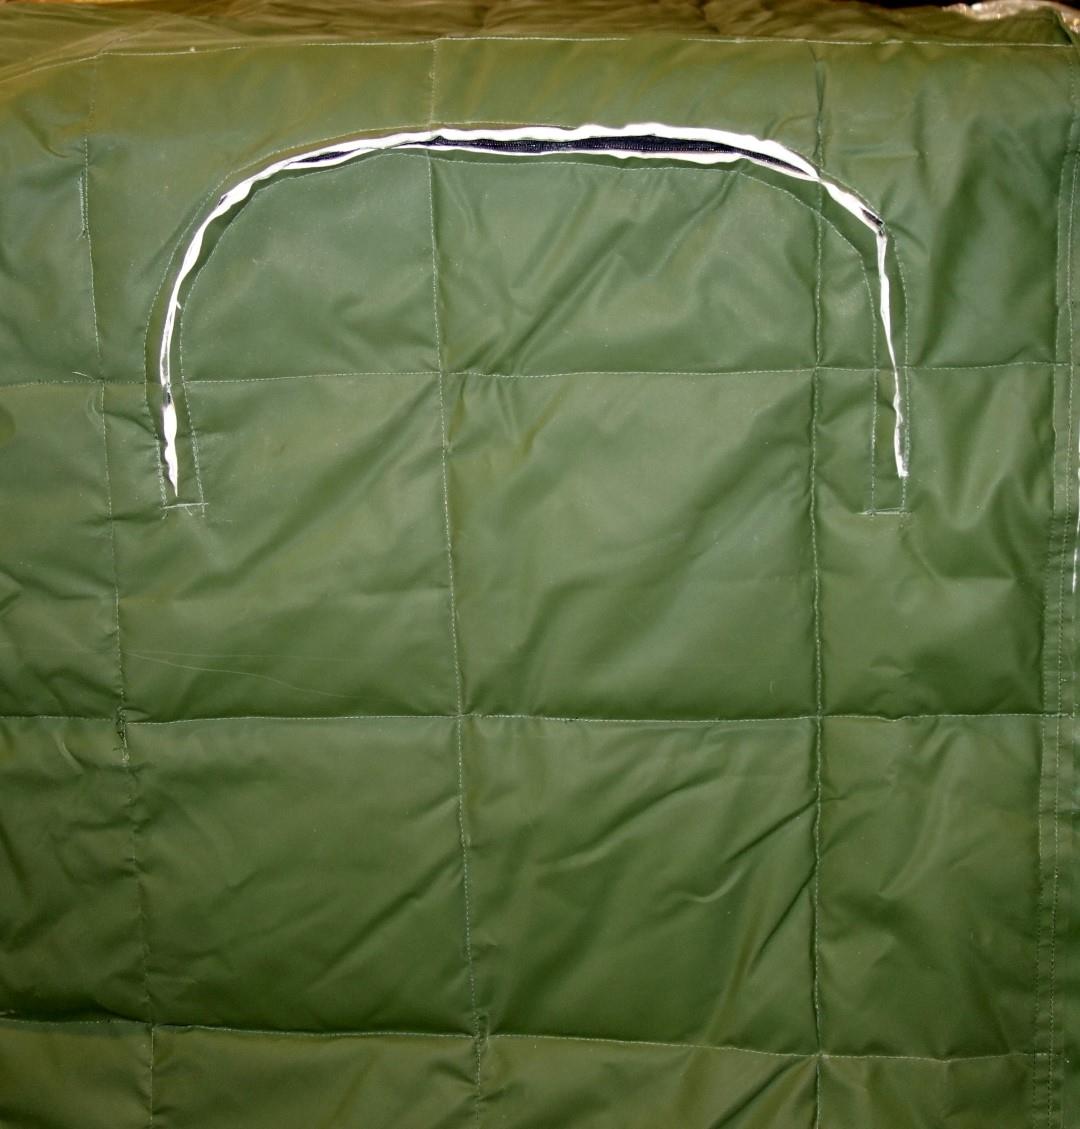 HM-708 | 2540-01-315-3762 Insulated Green Arctic Cargo Cover for 2 Door HMMWV NEW (9).JPG